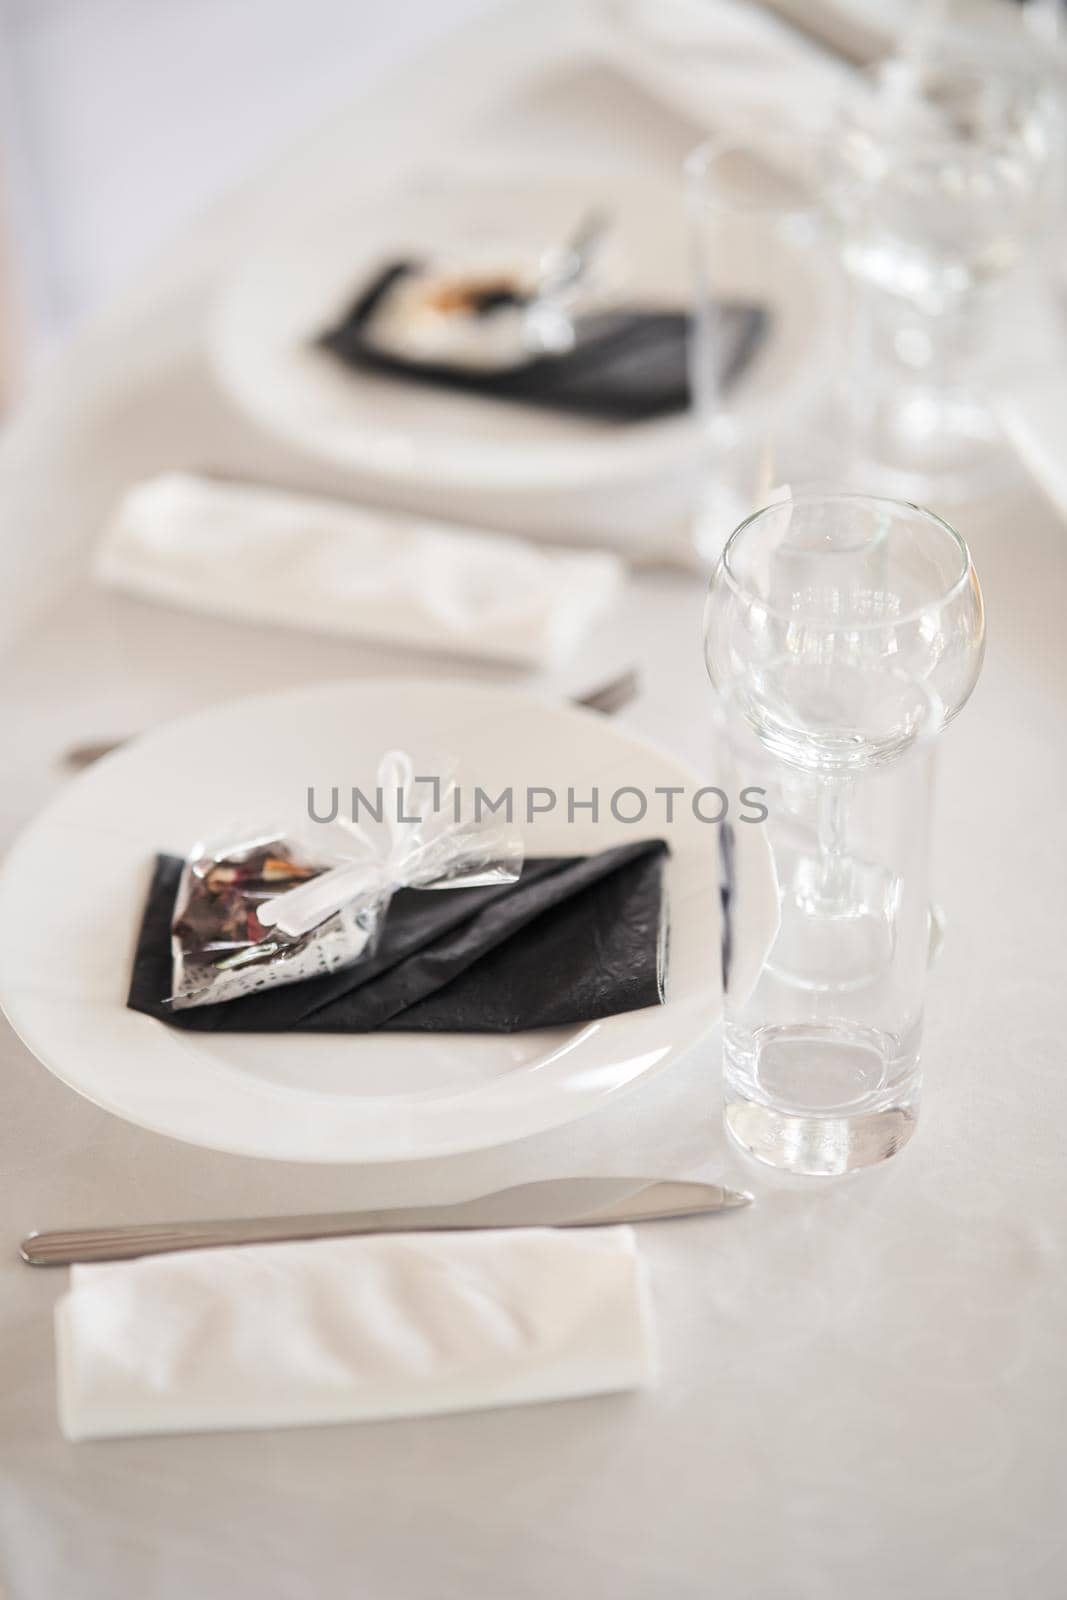 Table set for an event party or wedding reception. by driver-s